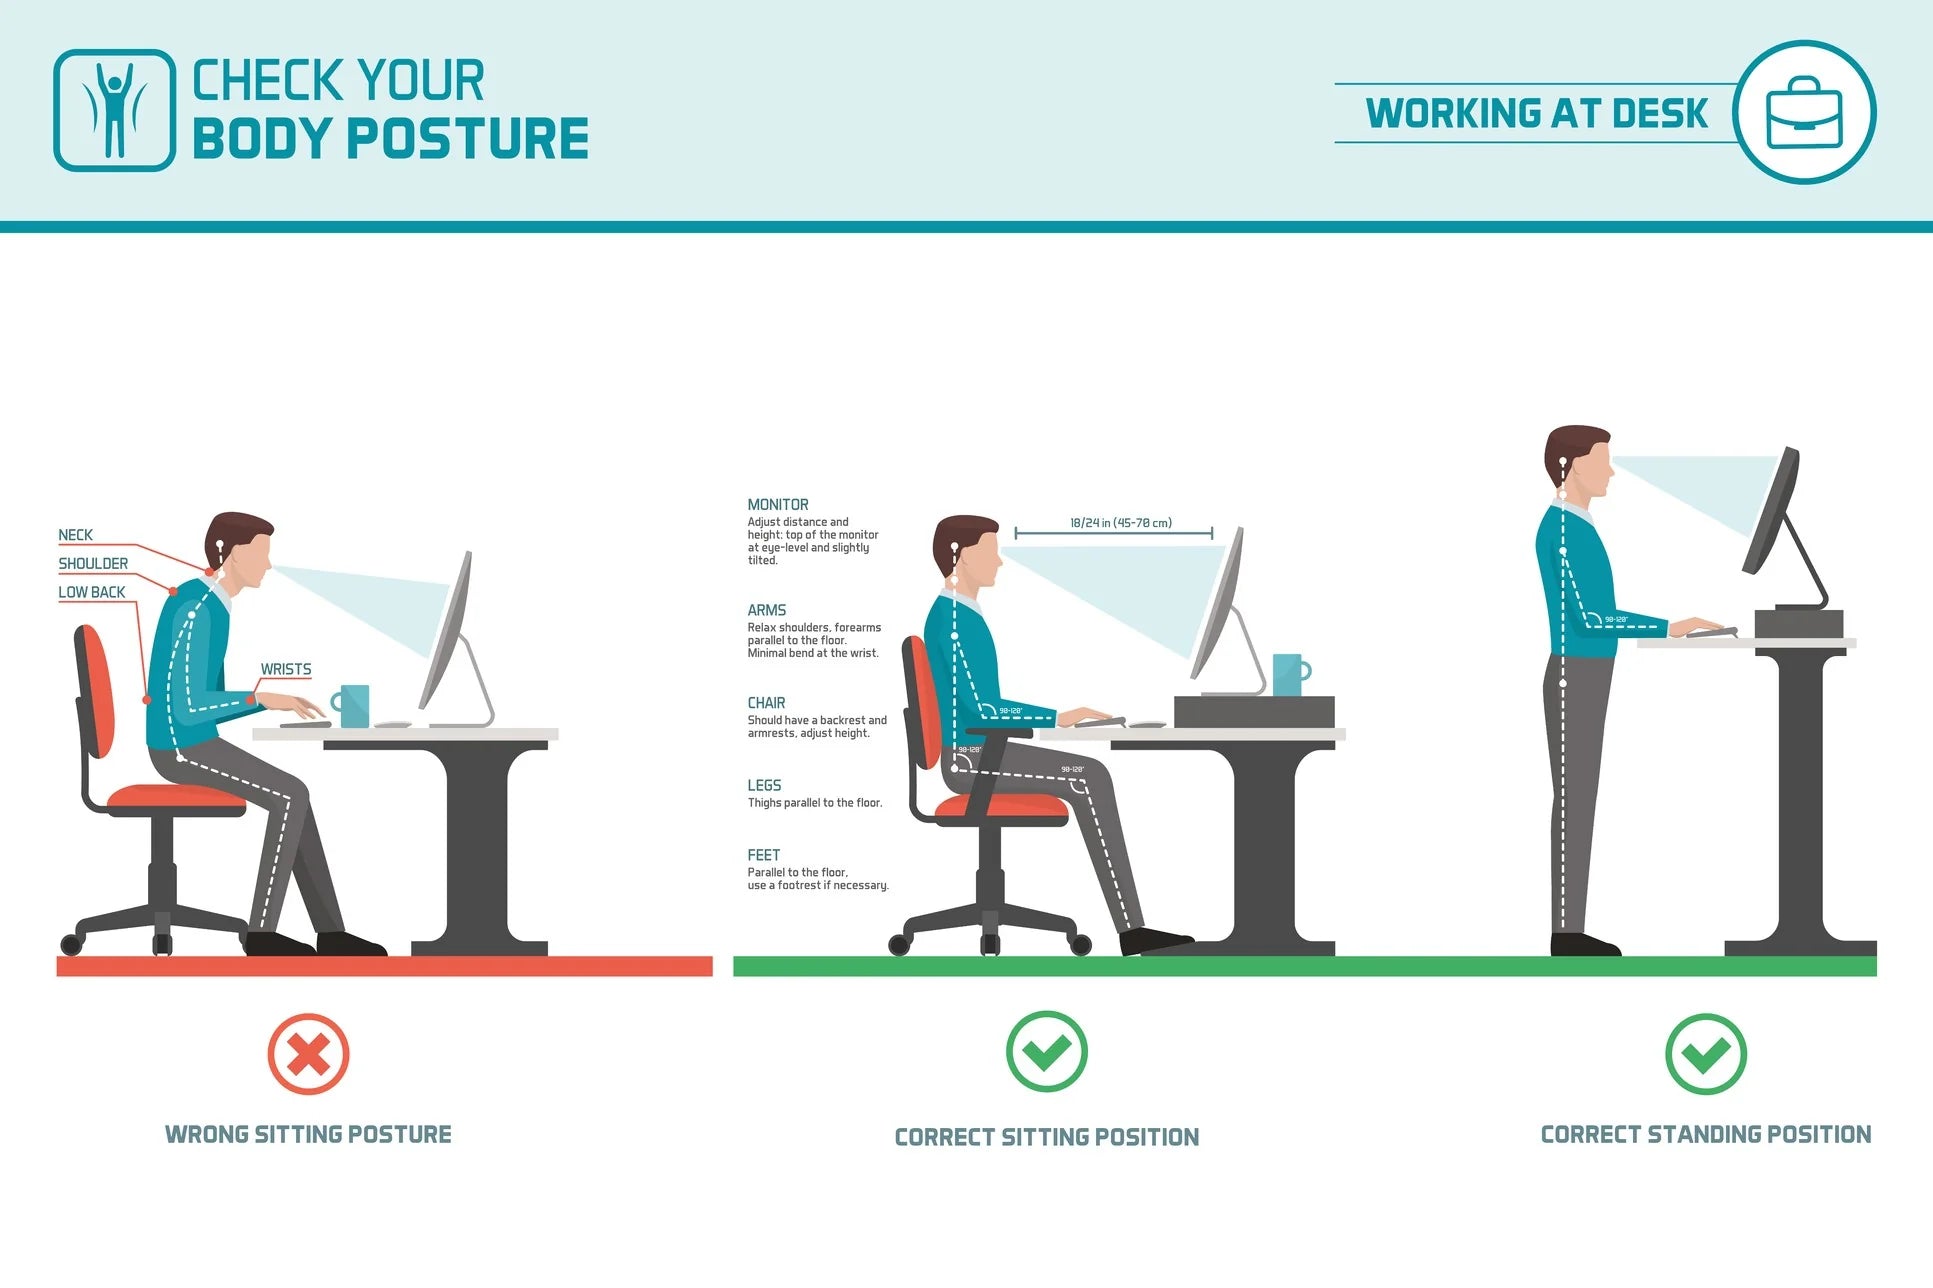 Diagram showing the wrong sitting posture - slouched neck, should and lower back - vs. the correct sitting and standing position - you should keep your monitor at eye level, your forearms should be parallel to the floor with minimal bend at the wrist, and thighs and feet should be parallel to the floor.